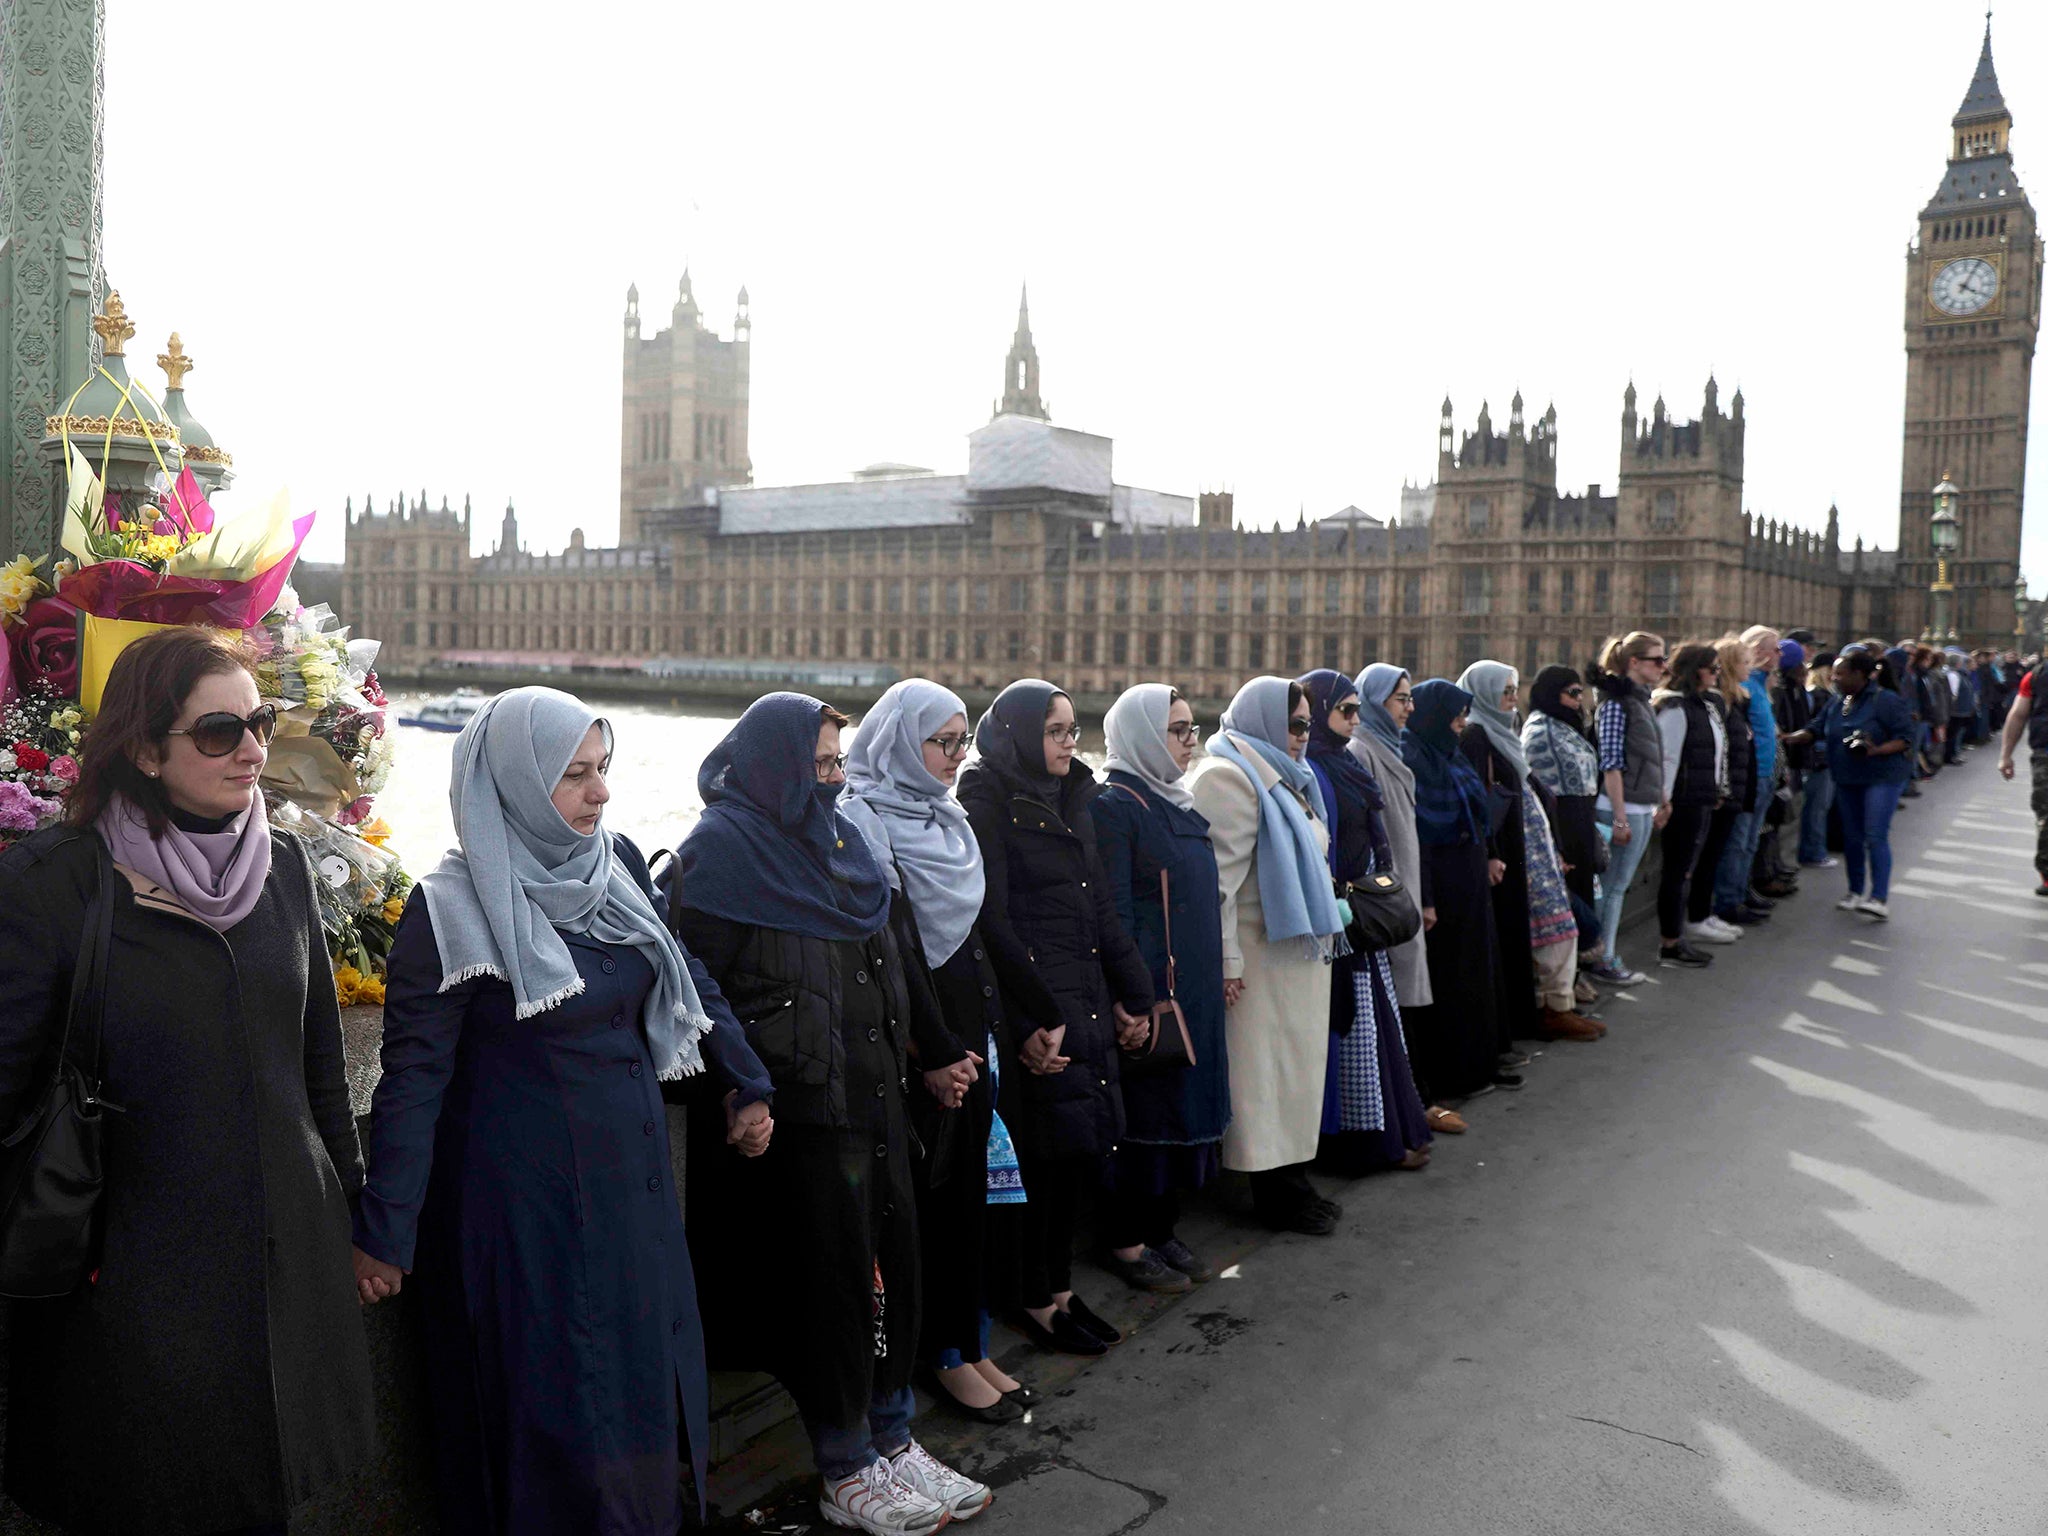 The women held hands in silence to remember victims of the terror attack in Westminster